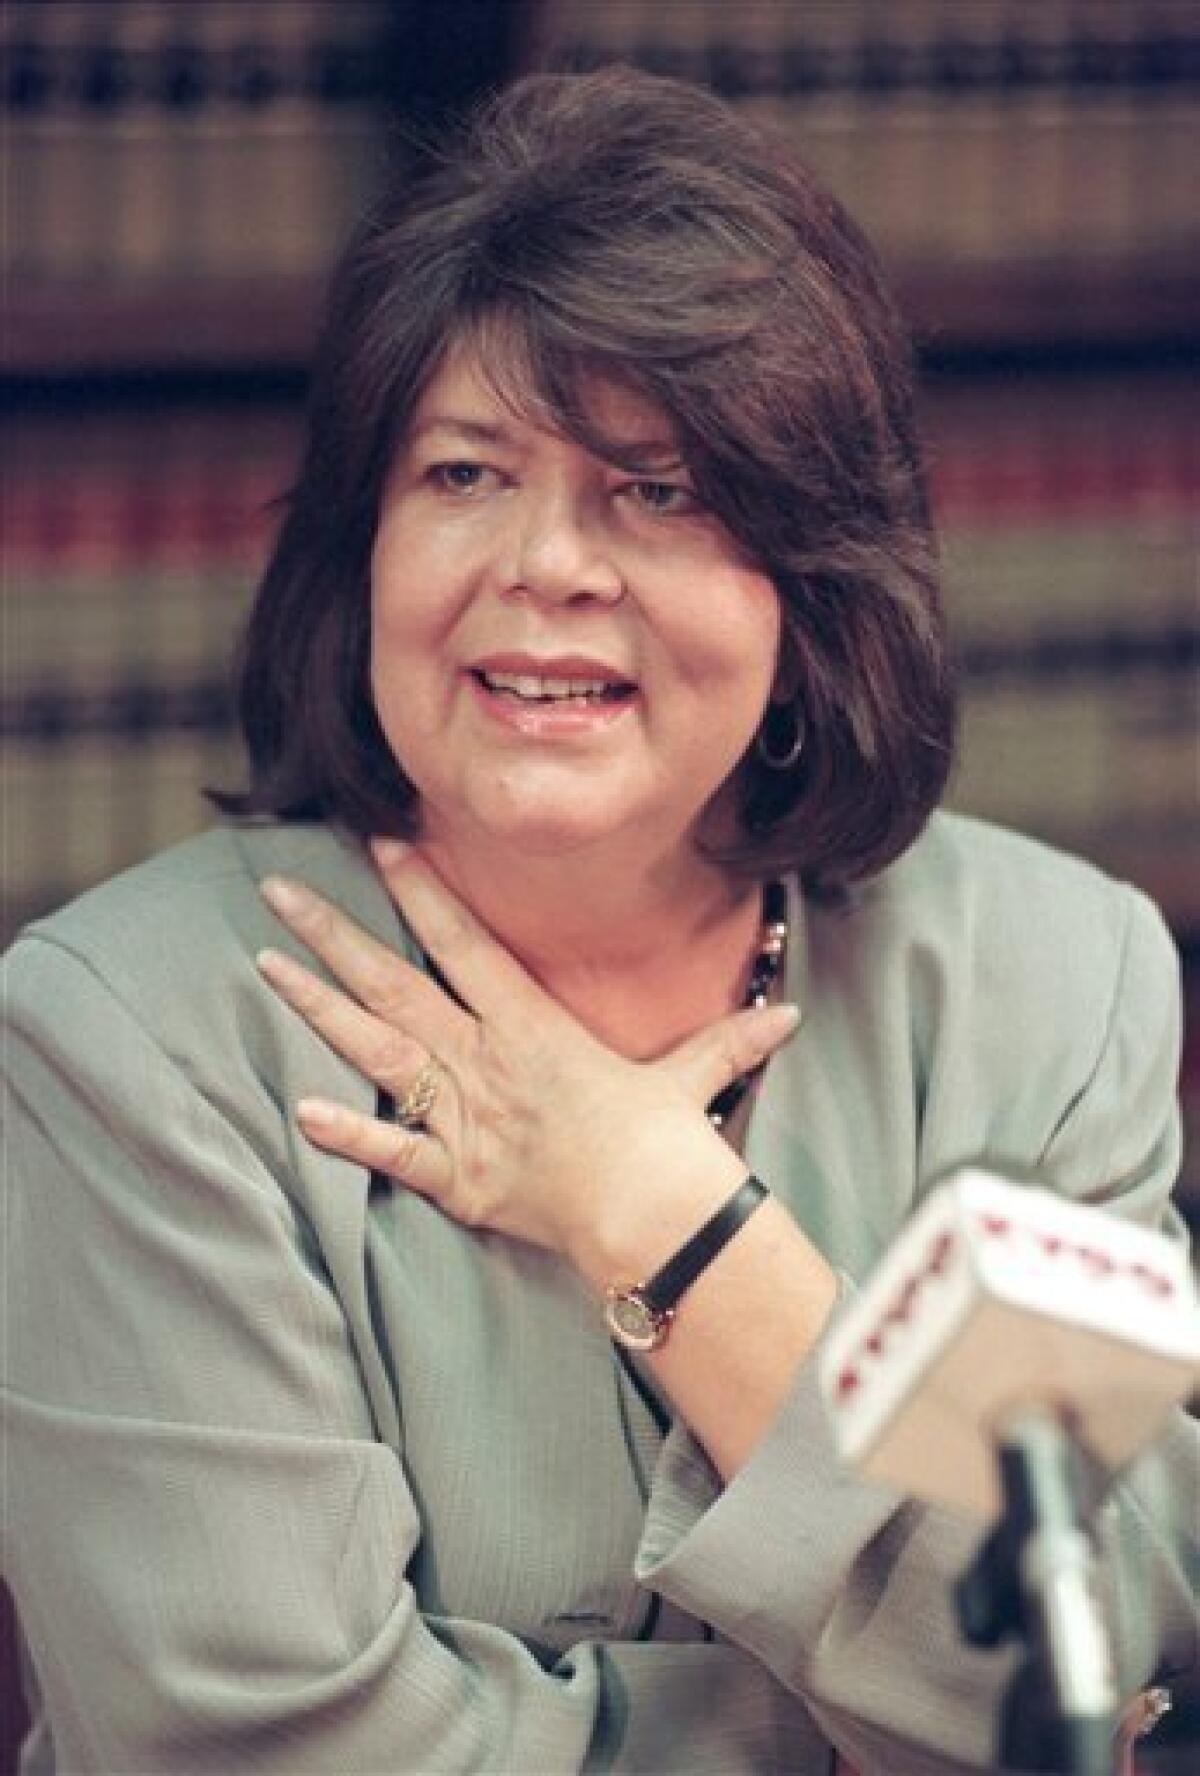 FILE - In this Sept. 19, 1996 file photo, Wilma Mankiller, former Cherokee Nation chief, speaks during a news conference in Tulsa, Okla. Mankiller, was one of the few women ever to lead a major American Indian tribe, died Tuesday April 6, 2010 after battling pancreatic cancer. She was 64. (AP Photo/Michael Wyke)